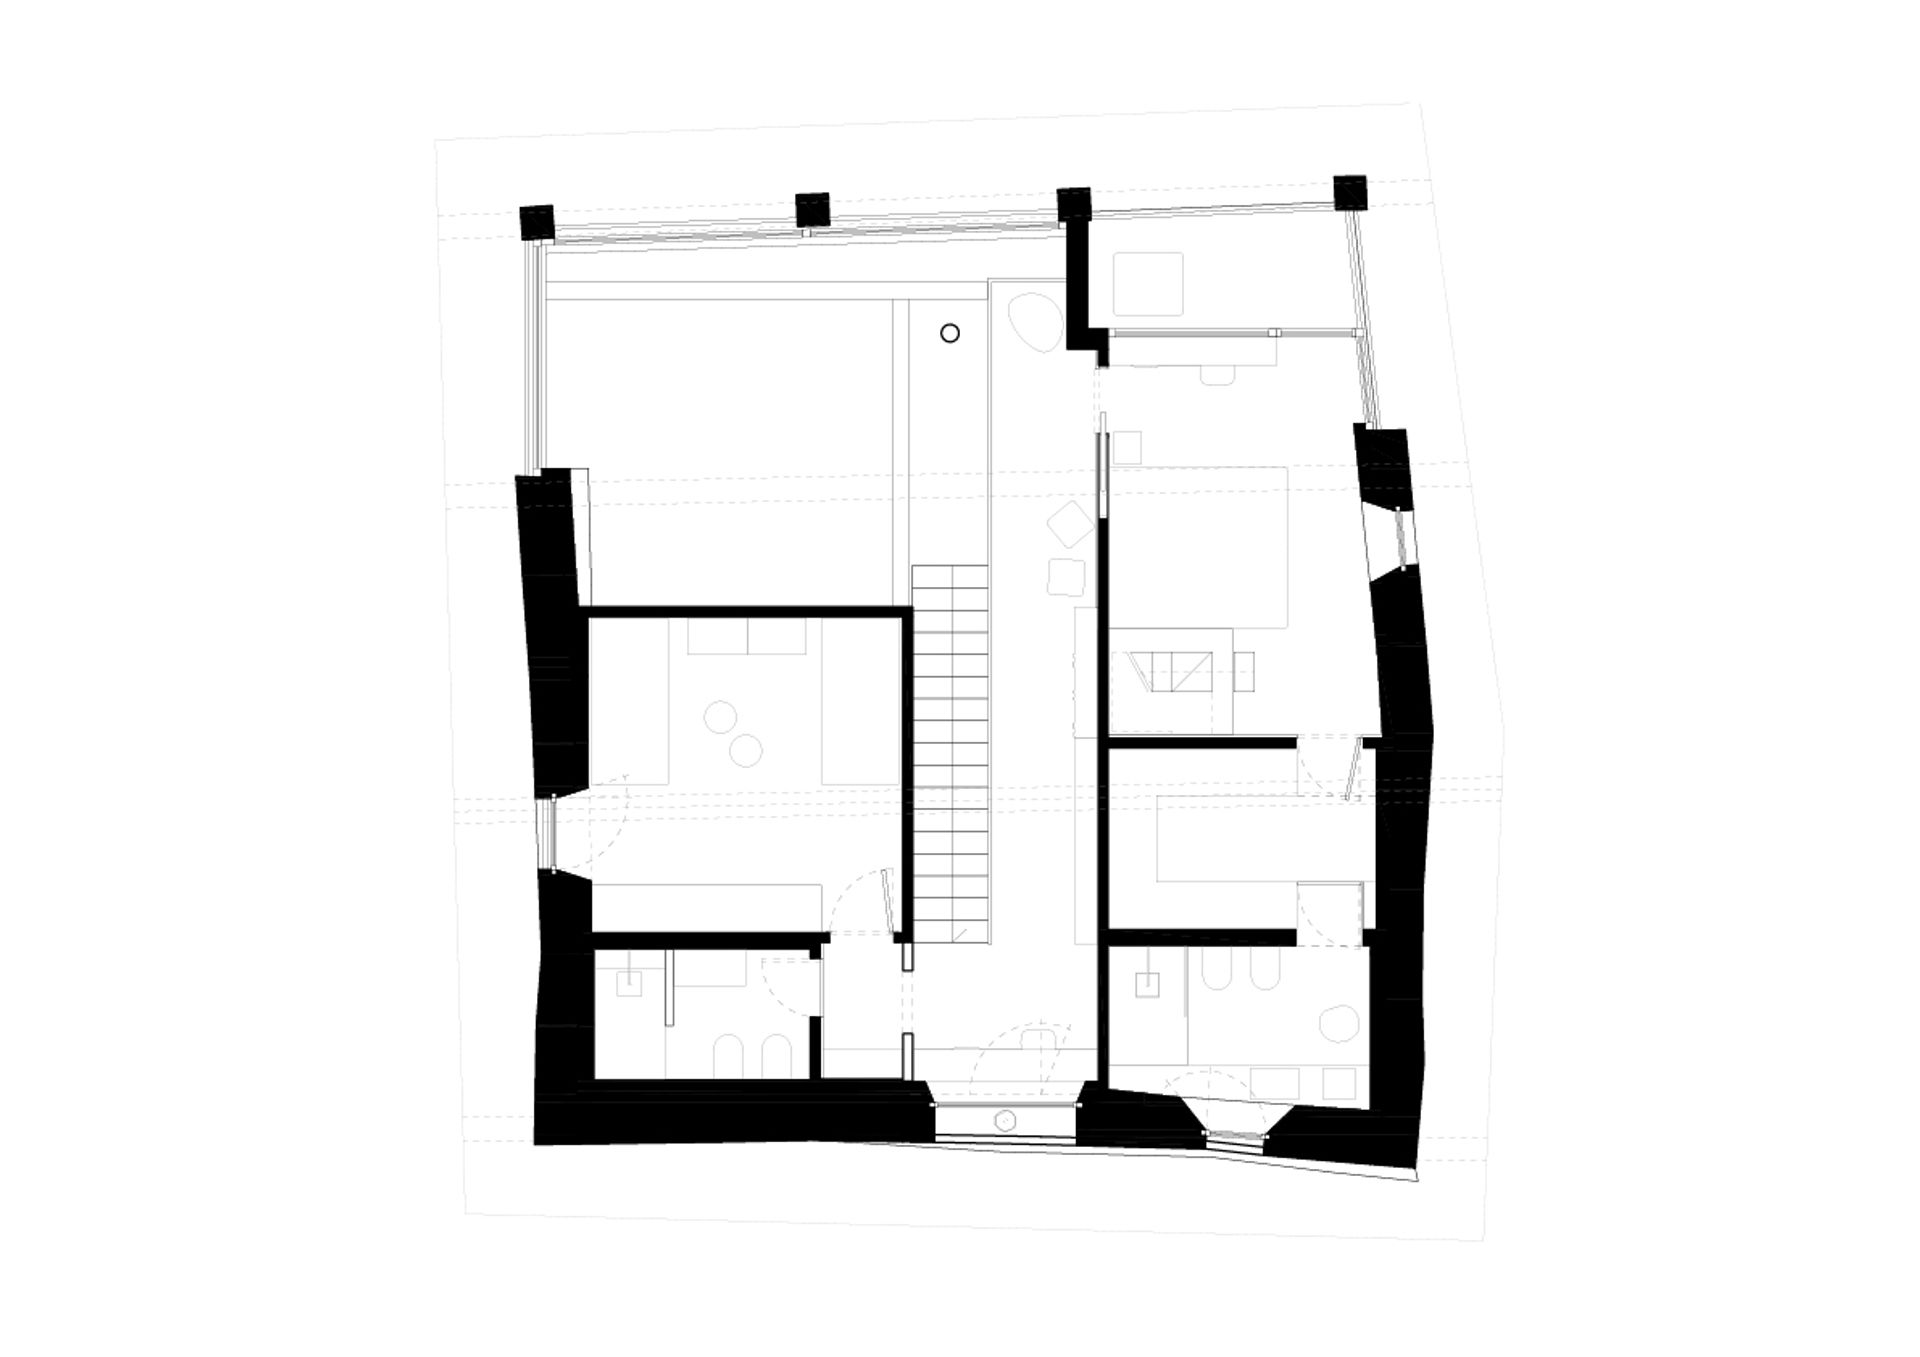 Farmhouse renovation project, recovery old house in the countryside of Bergamo. Officina Magisafi architecture design - first floor plan